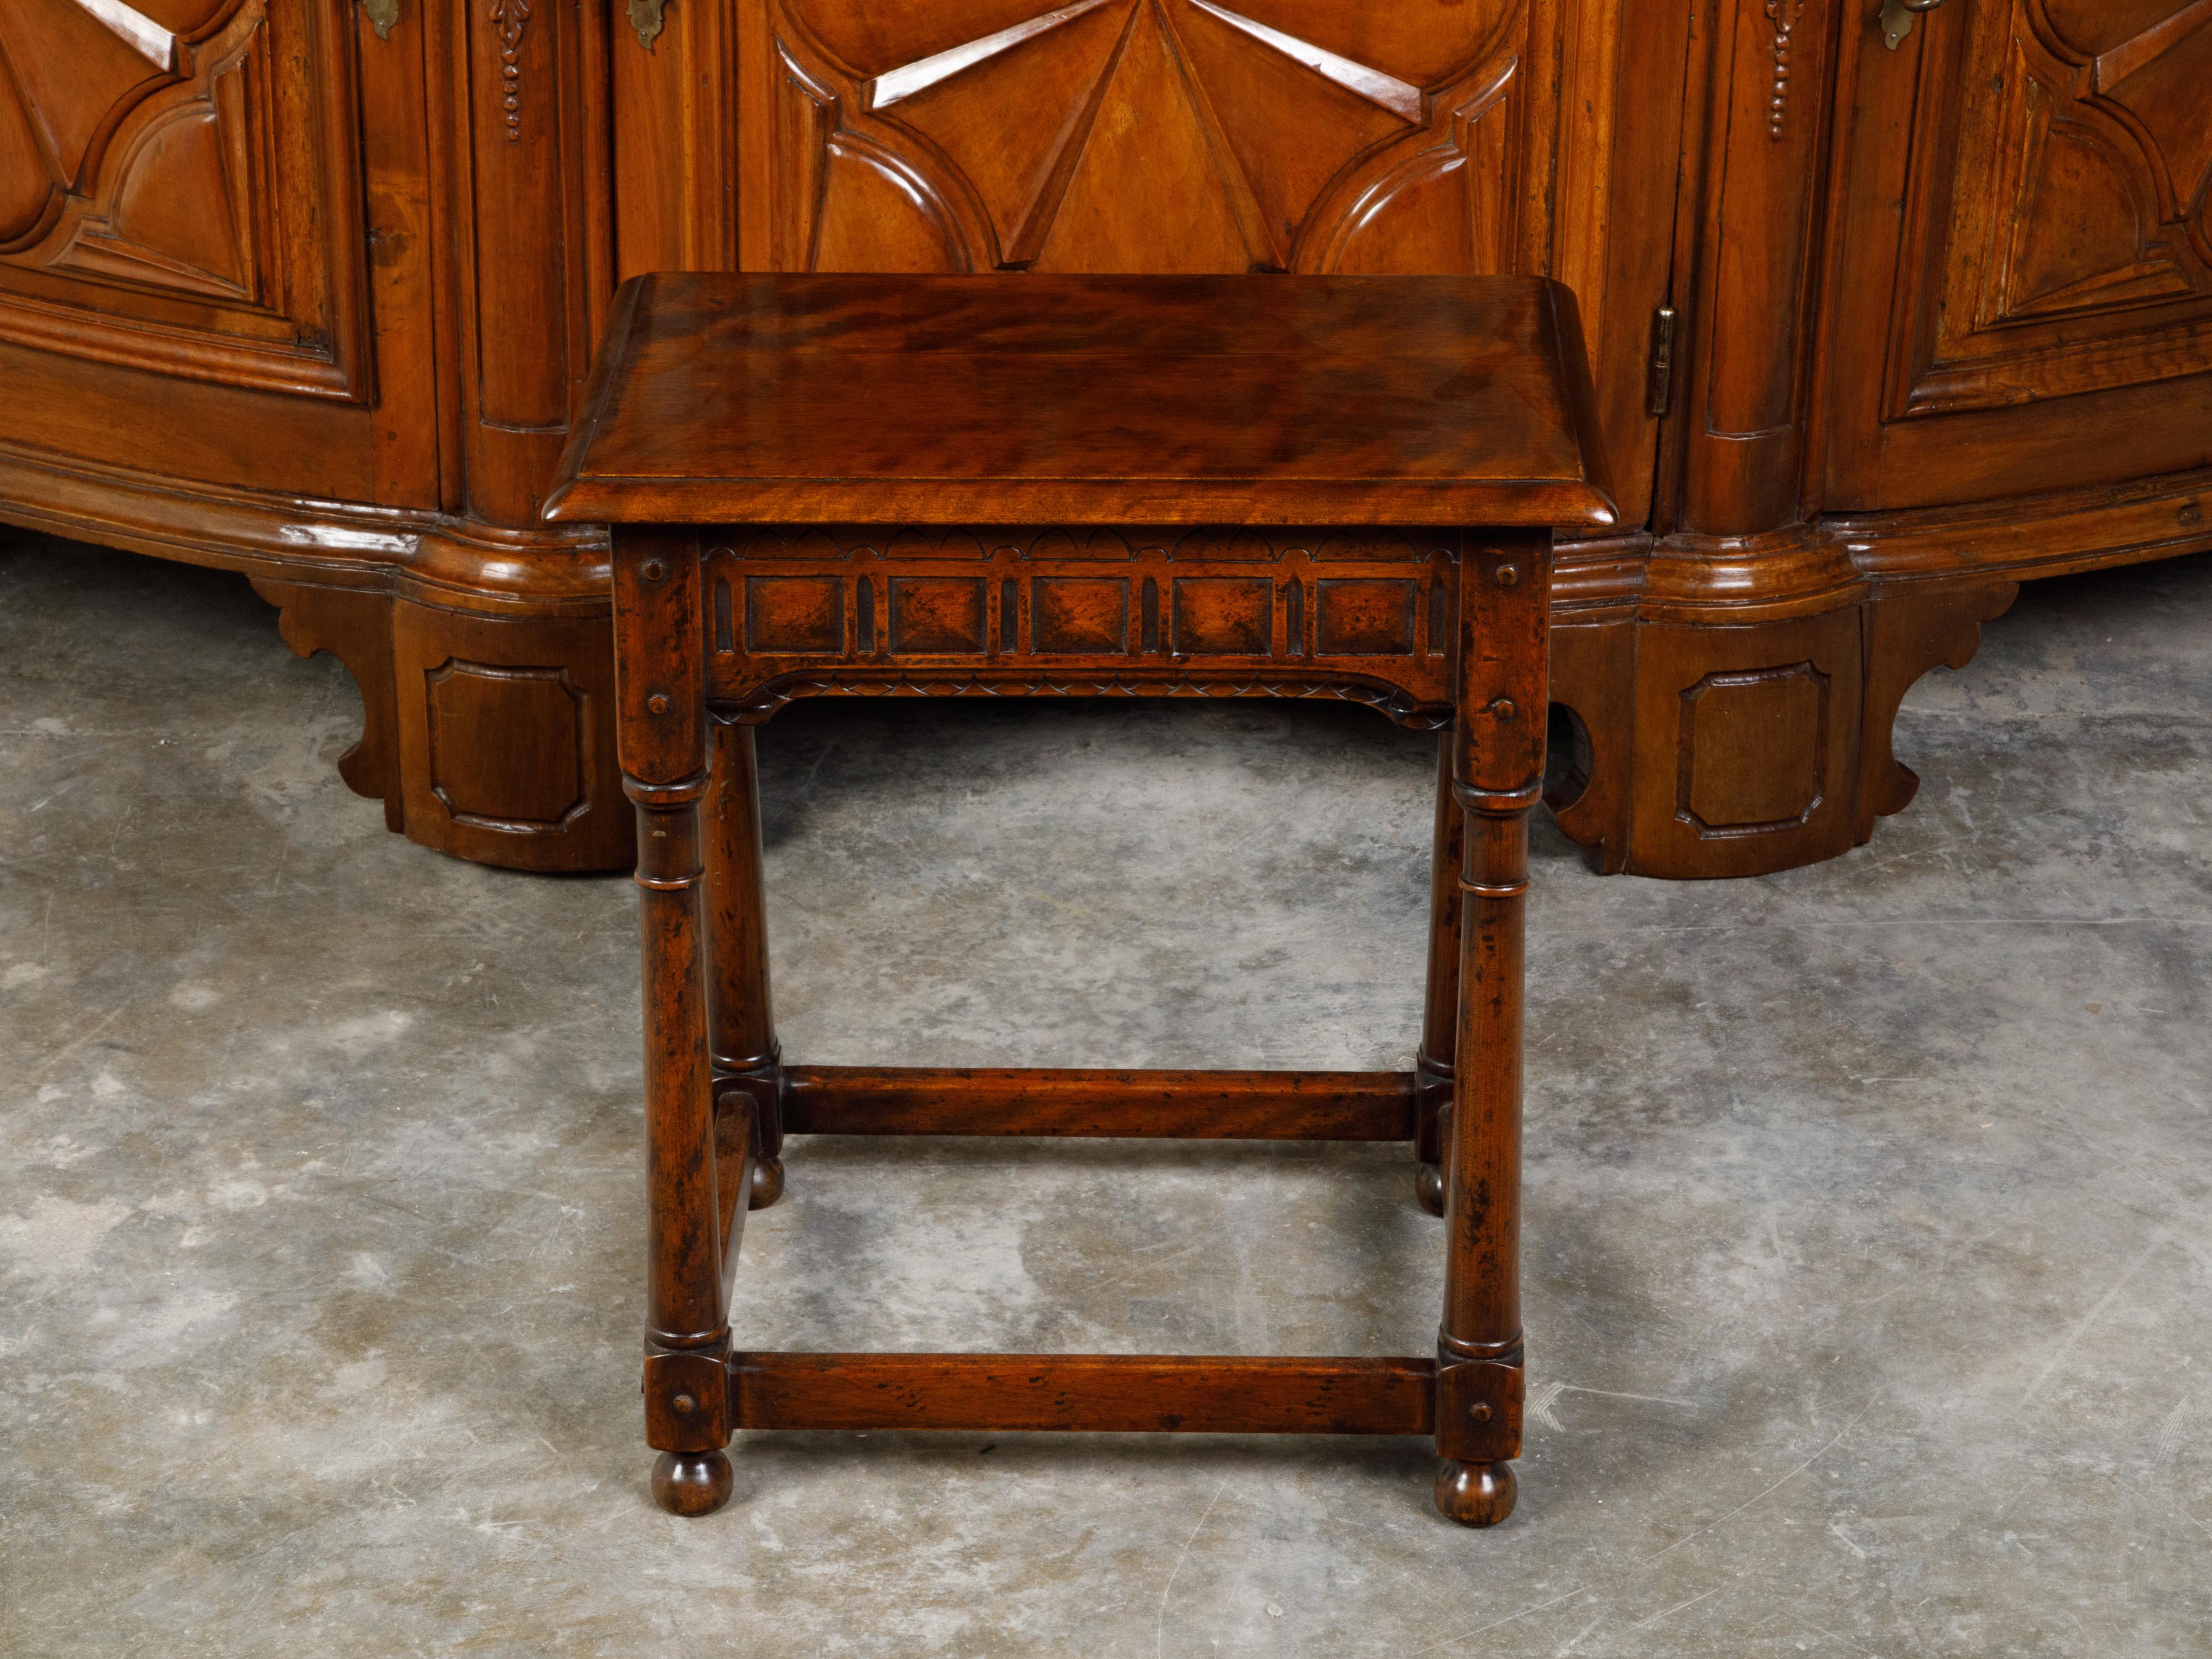 An English oak joint stool from the mid 20th century, with carved apron, turned legs and bun feet. Created in England during the Midcentury period, this oak joint stool features a rectangular top with beveled edges, sitting above an apron carved on